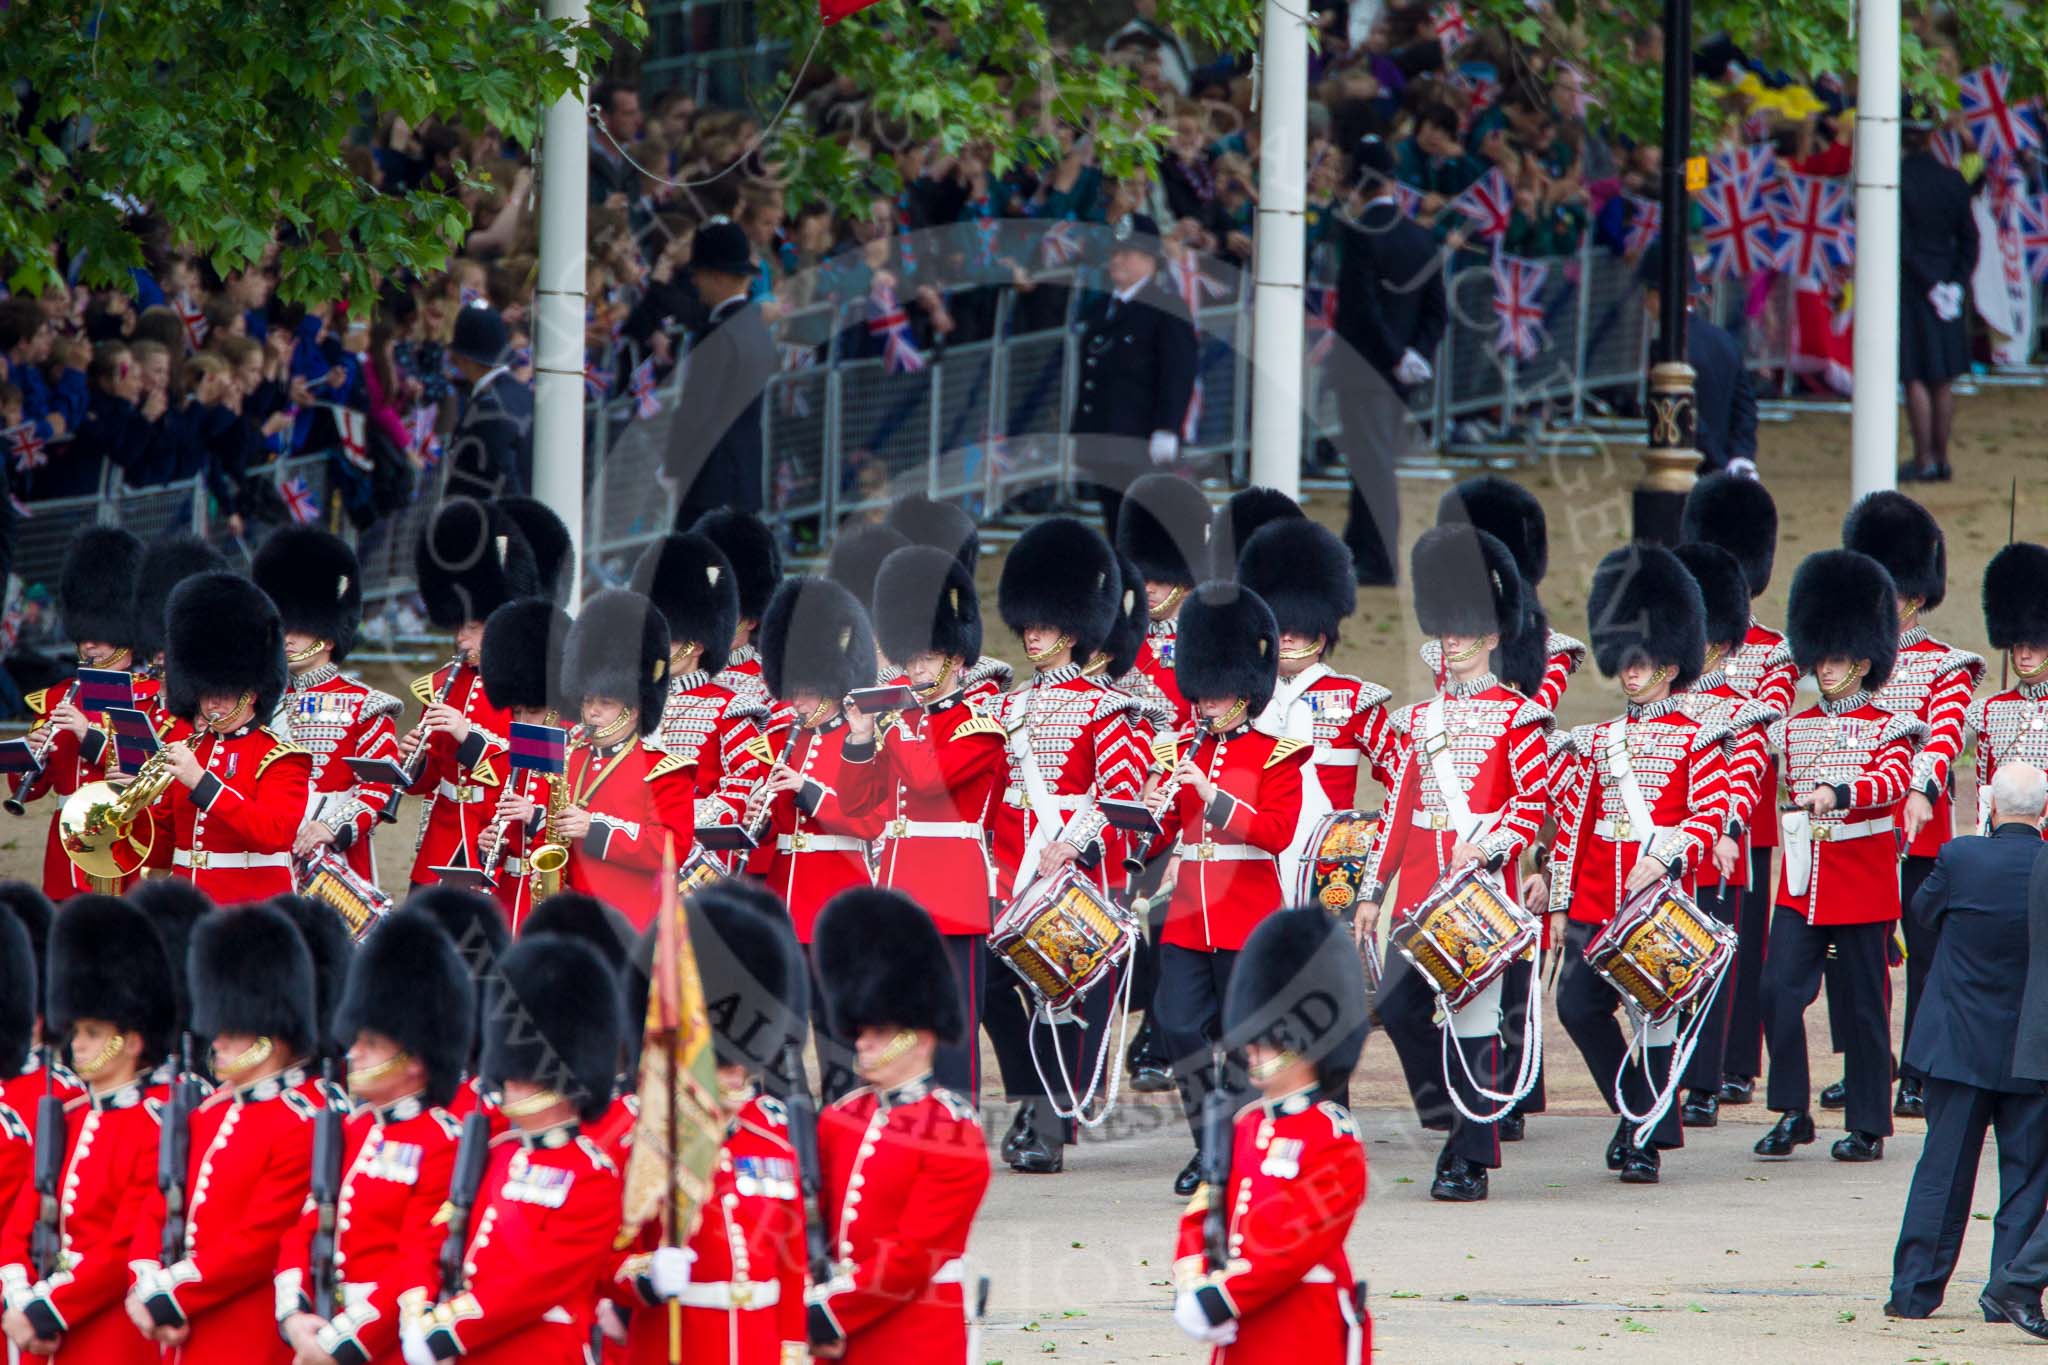 Trooping the Colour 2013: The Band of the Grenadier Guards marches past No. 5 Guard, F Company Scots Guards, on the northern side of Horse Guards Parade. Image #88, 15 June 2013 10:27 Horse Guards Parade, London, UK